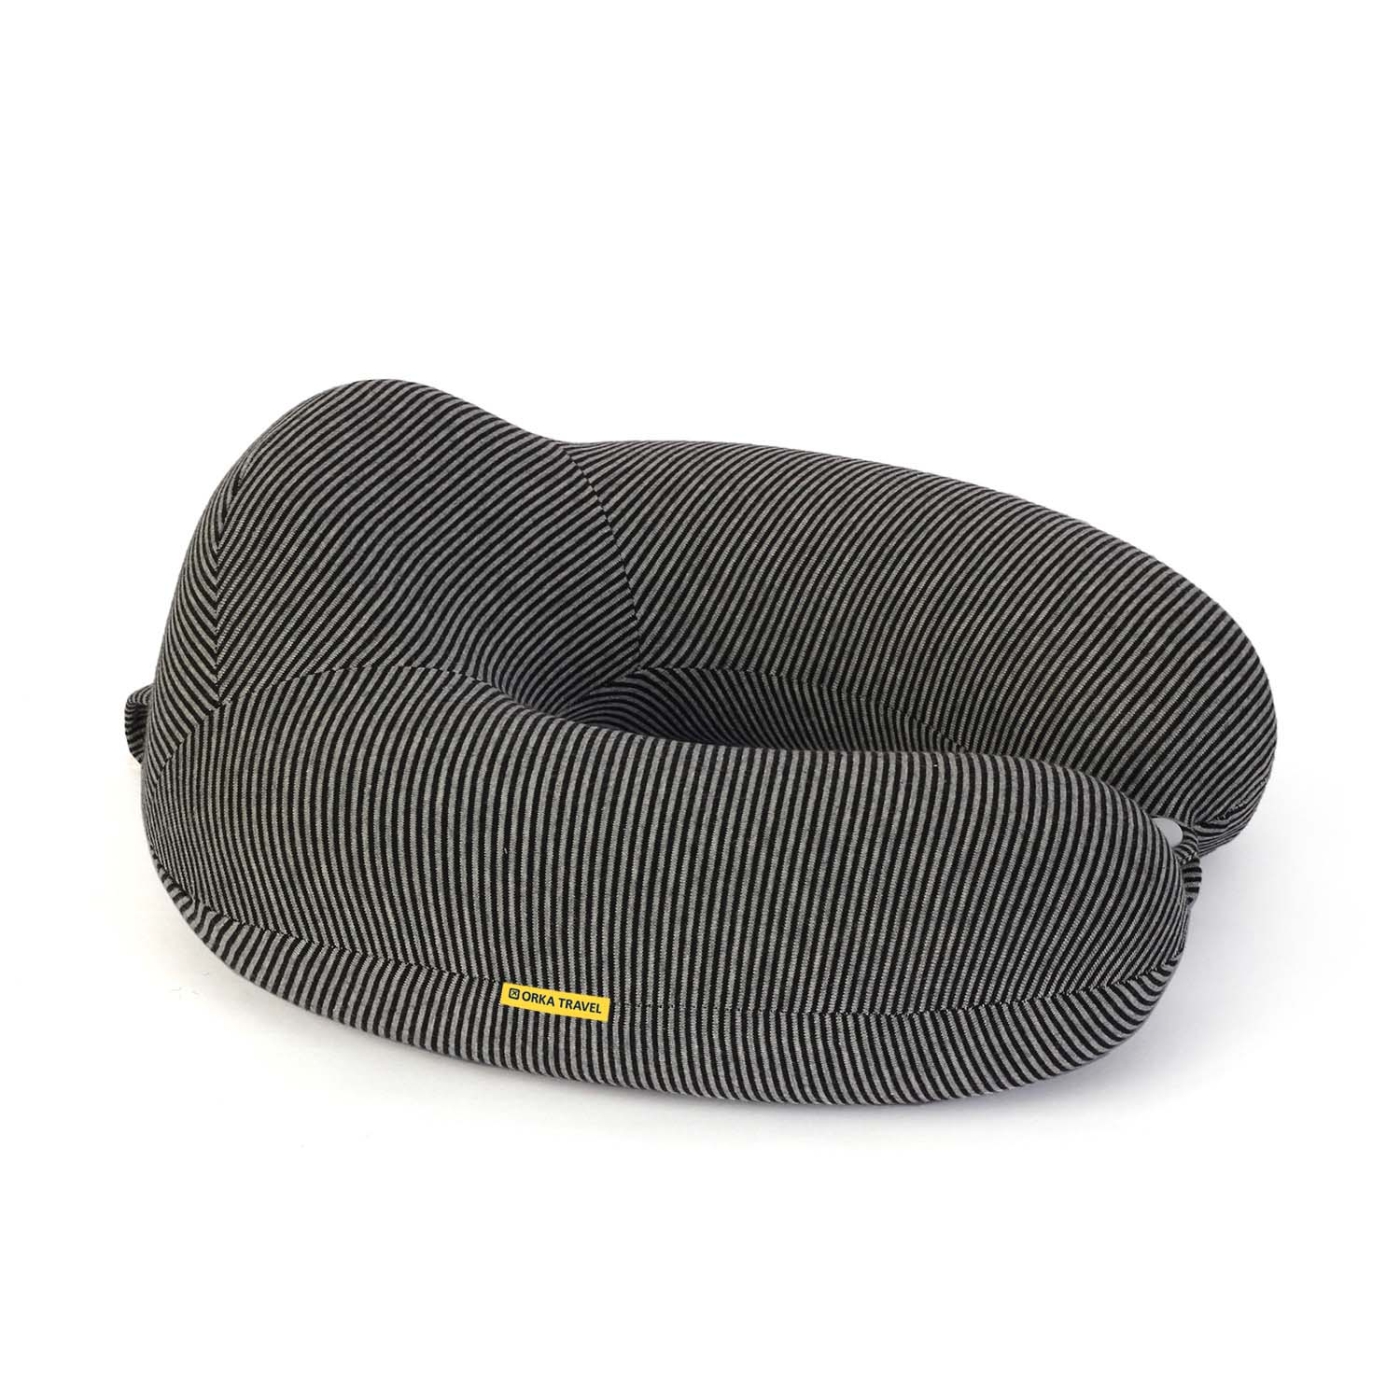 ORKA TRAVEL Stripes Special Thermo Sensitive Memory Foam U Shaped Travel Neck Pillow  